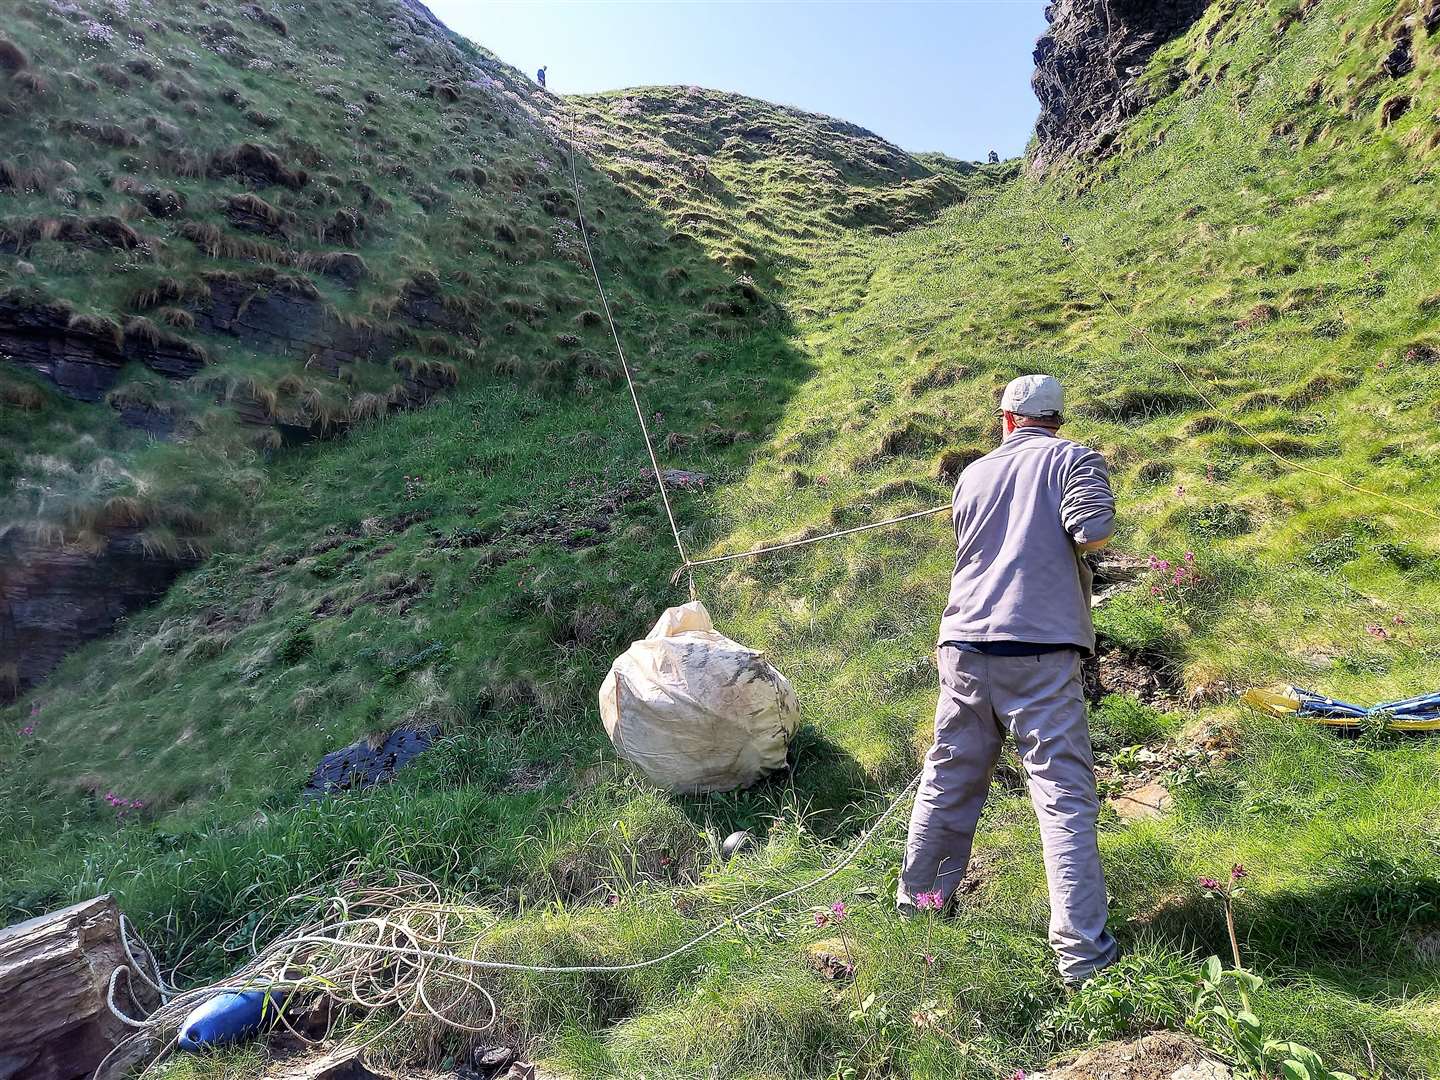 Hoisting rubbish up a steep incline at the inlet near Wick. Pictures: David Shand